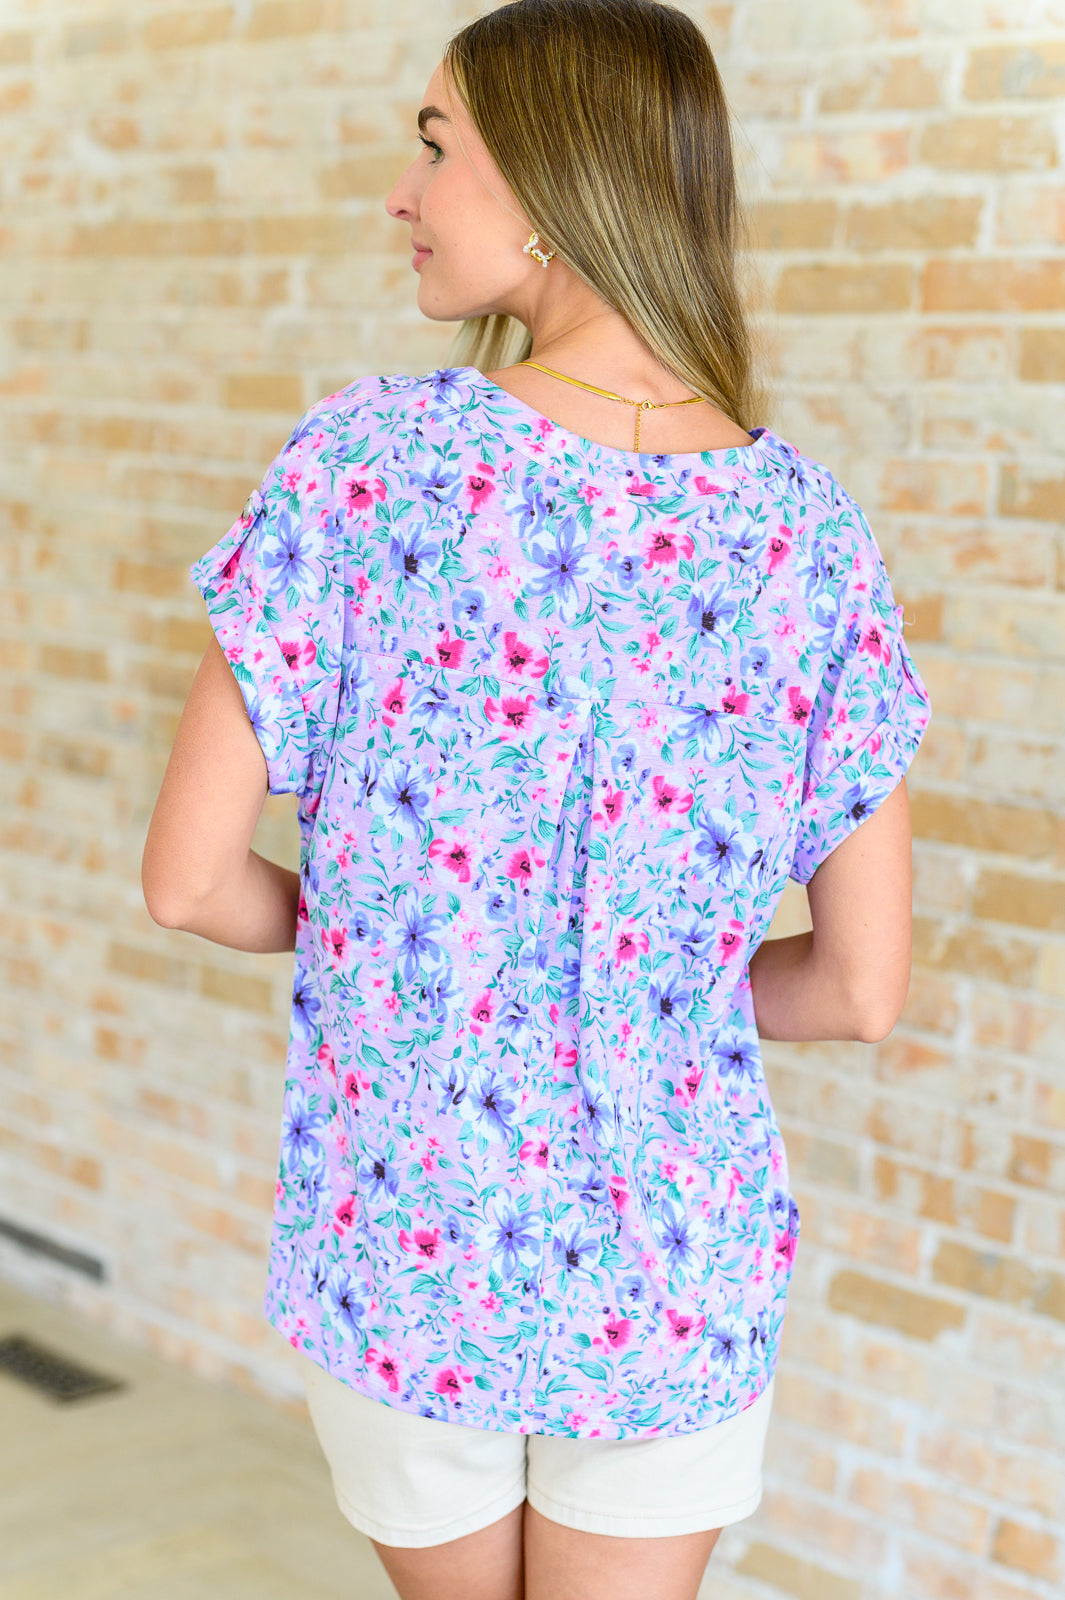 Lizzy Cap Sleeve Top in Muted Lavender and Pink Floral